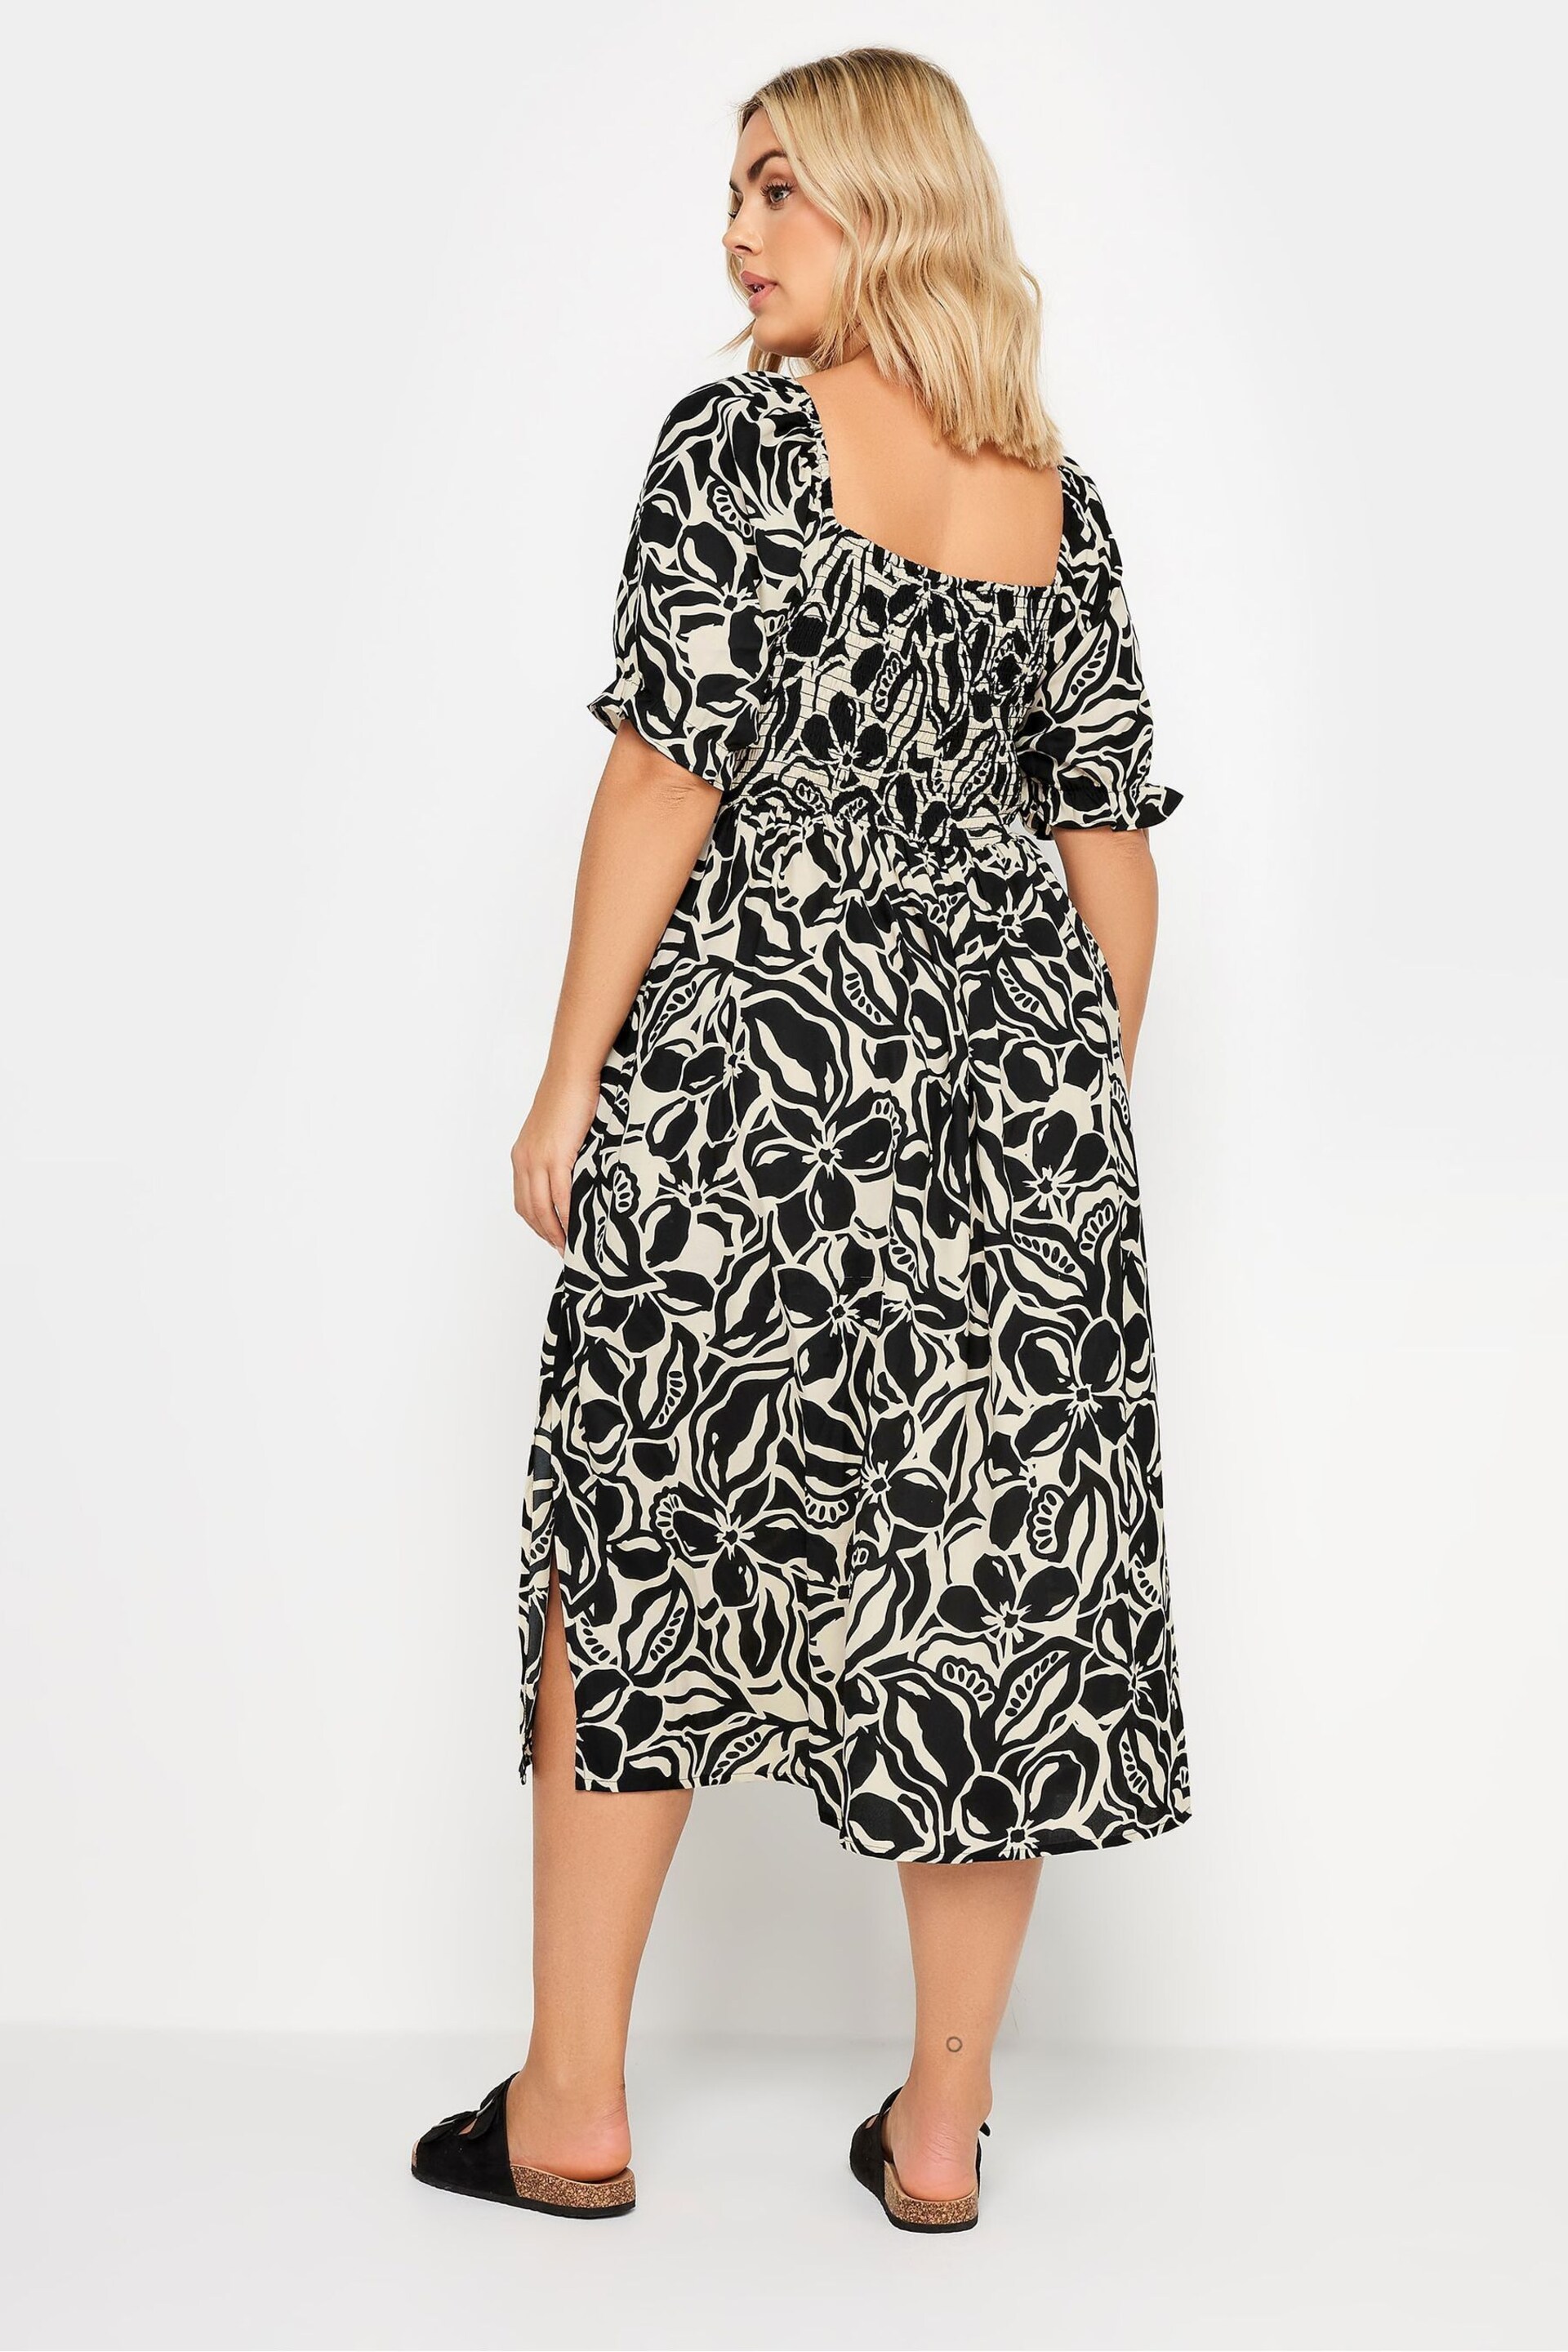 Yours Curve Black Abstract Floral Print Shirred Midi Dress - Image 3 of 6